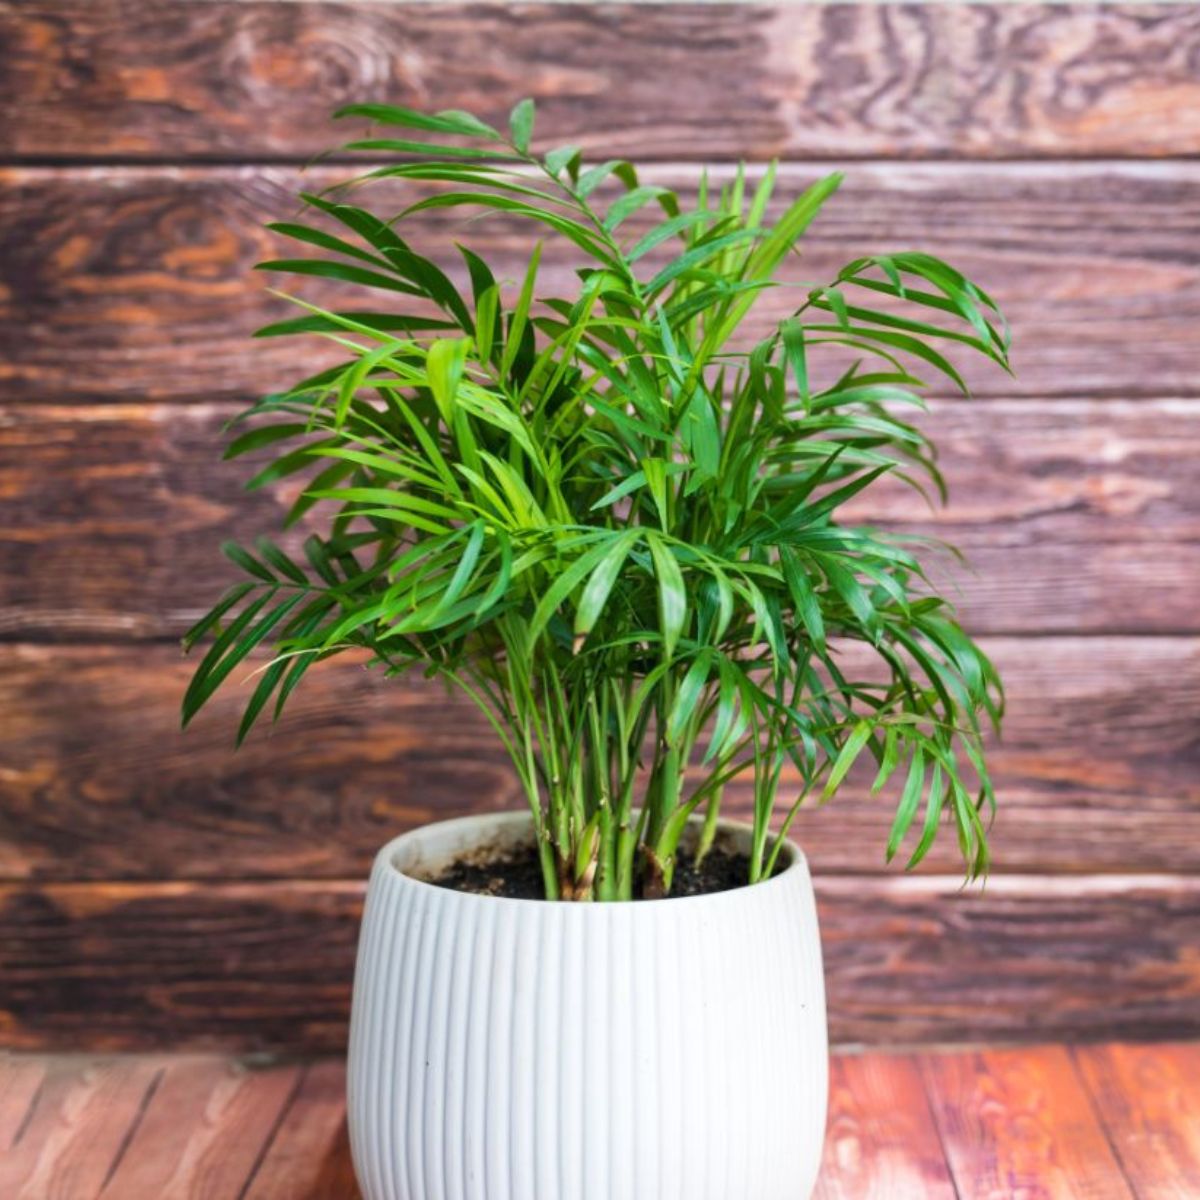 Parlor palm grows in a white pot on a wooden table.